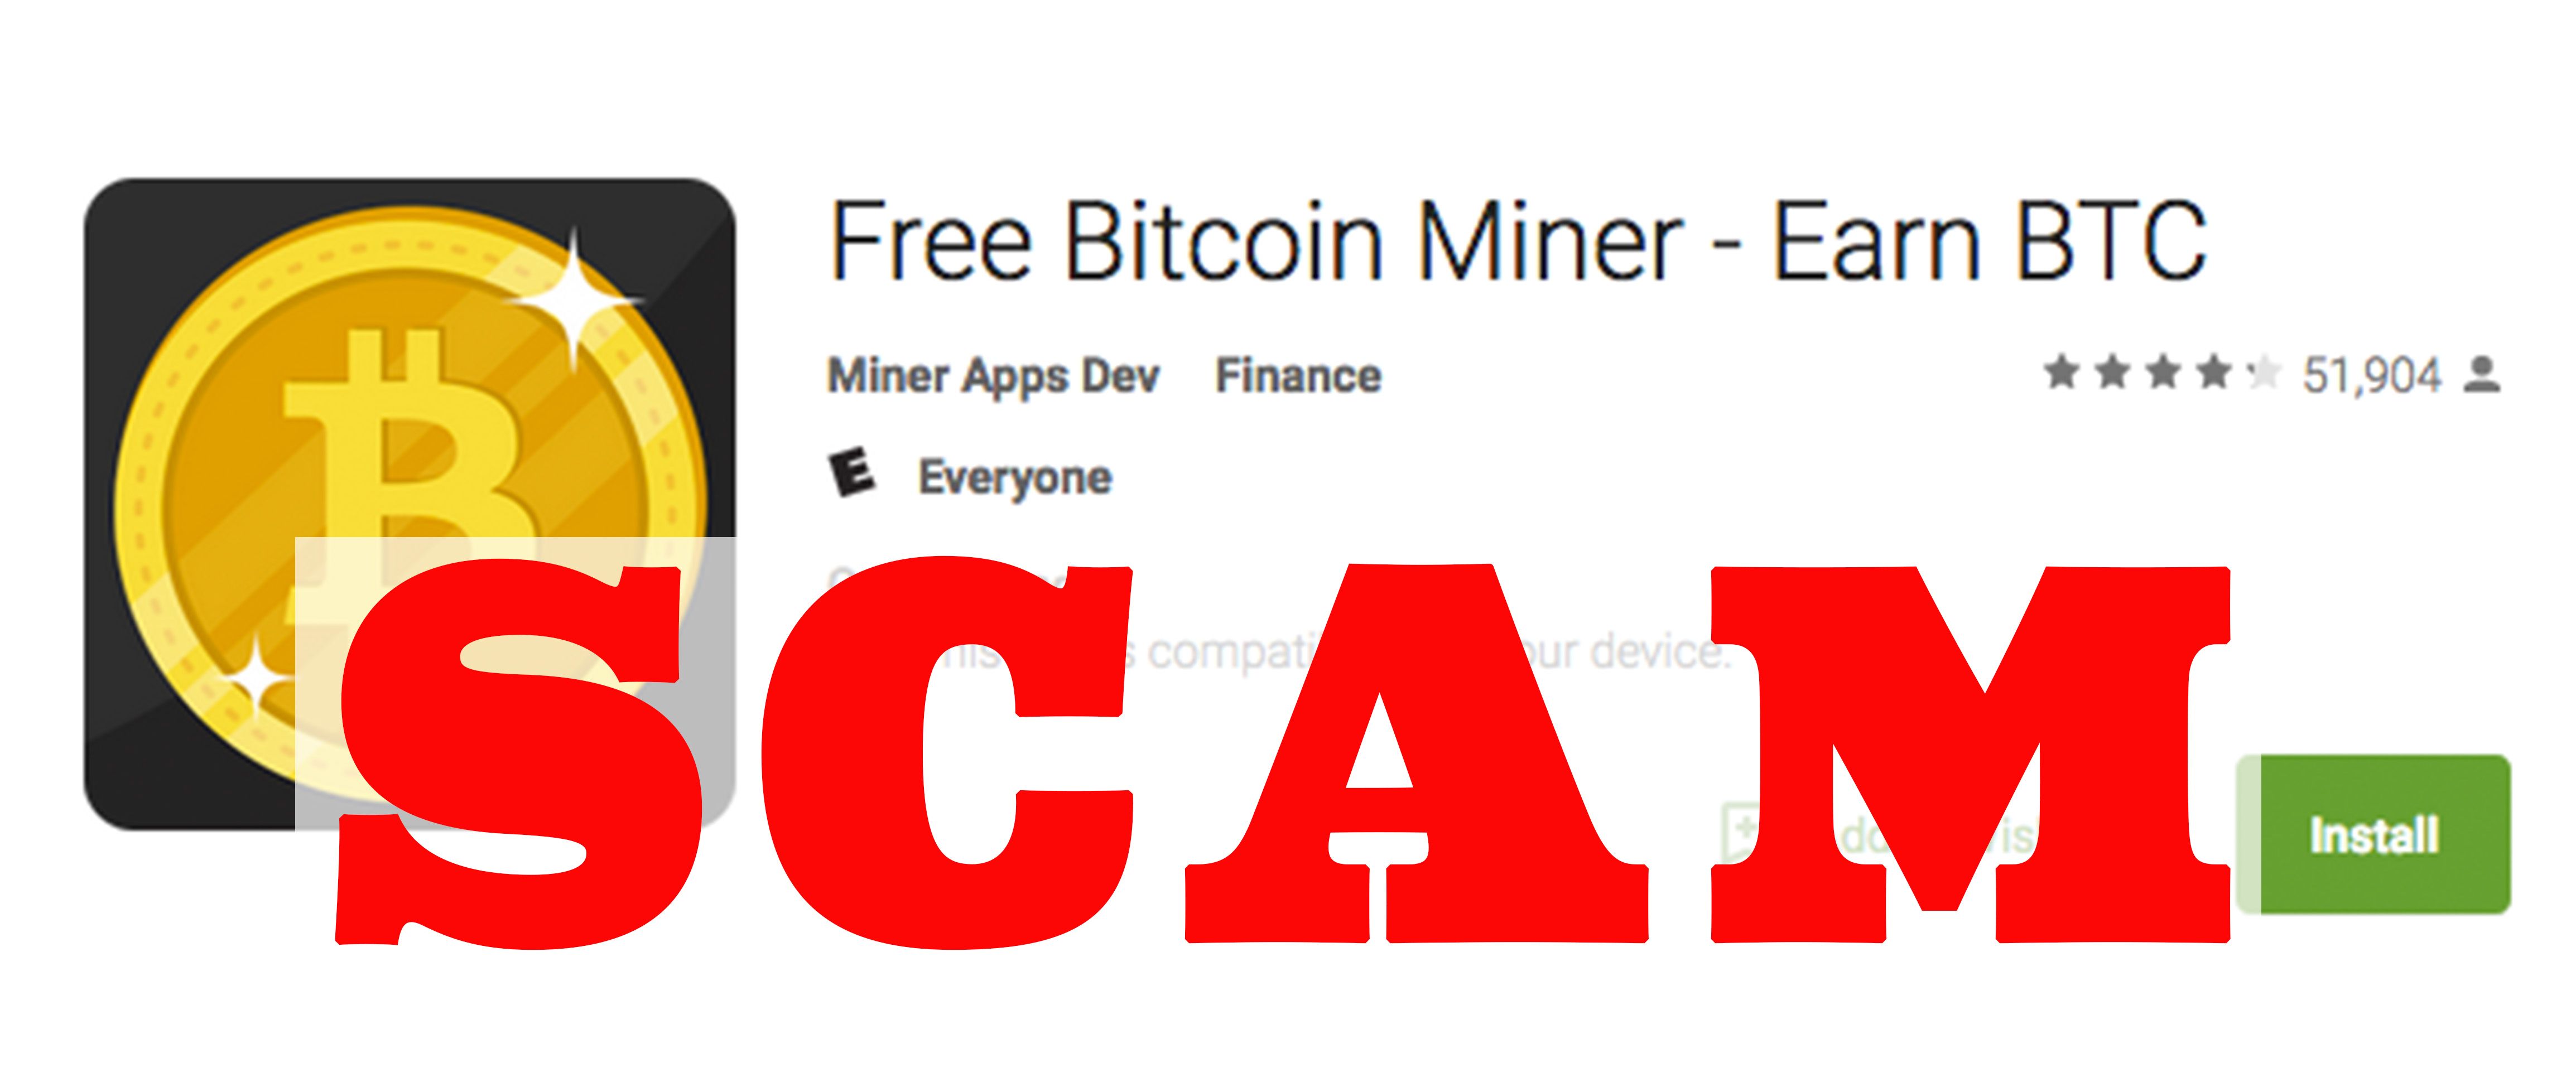 Scam-Free-Bit-Coin-Miner-App-Review-Scam-Bitcoin.jpg